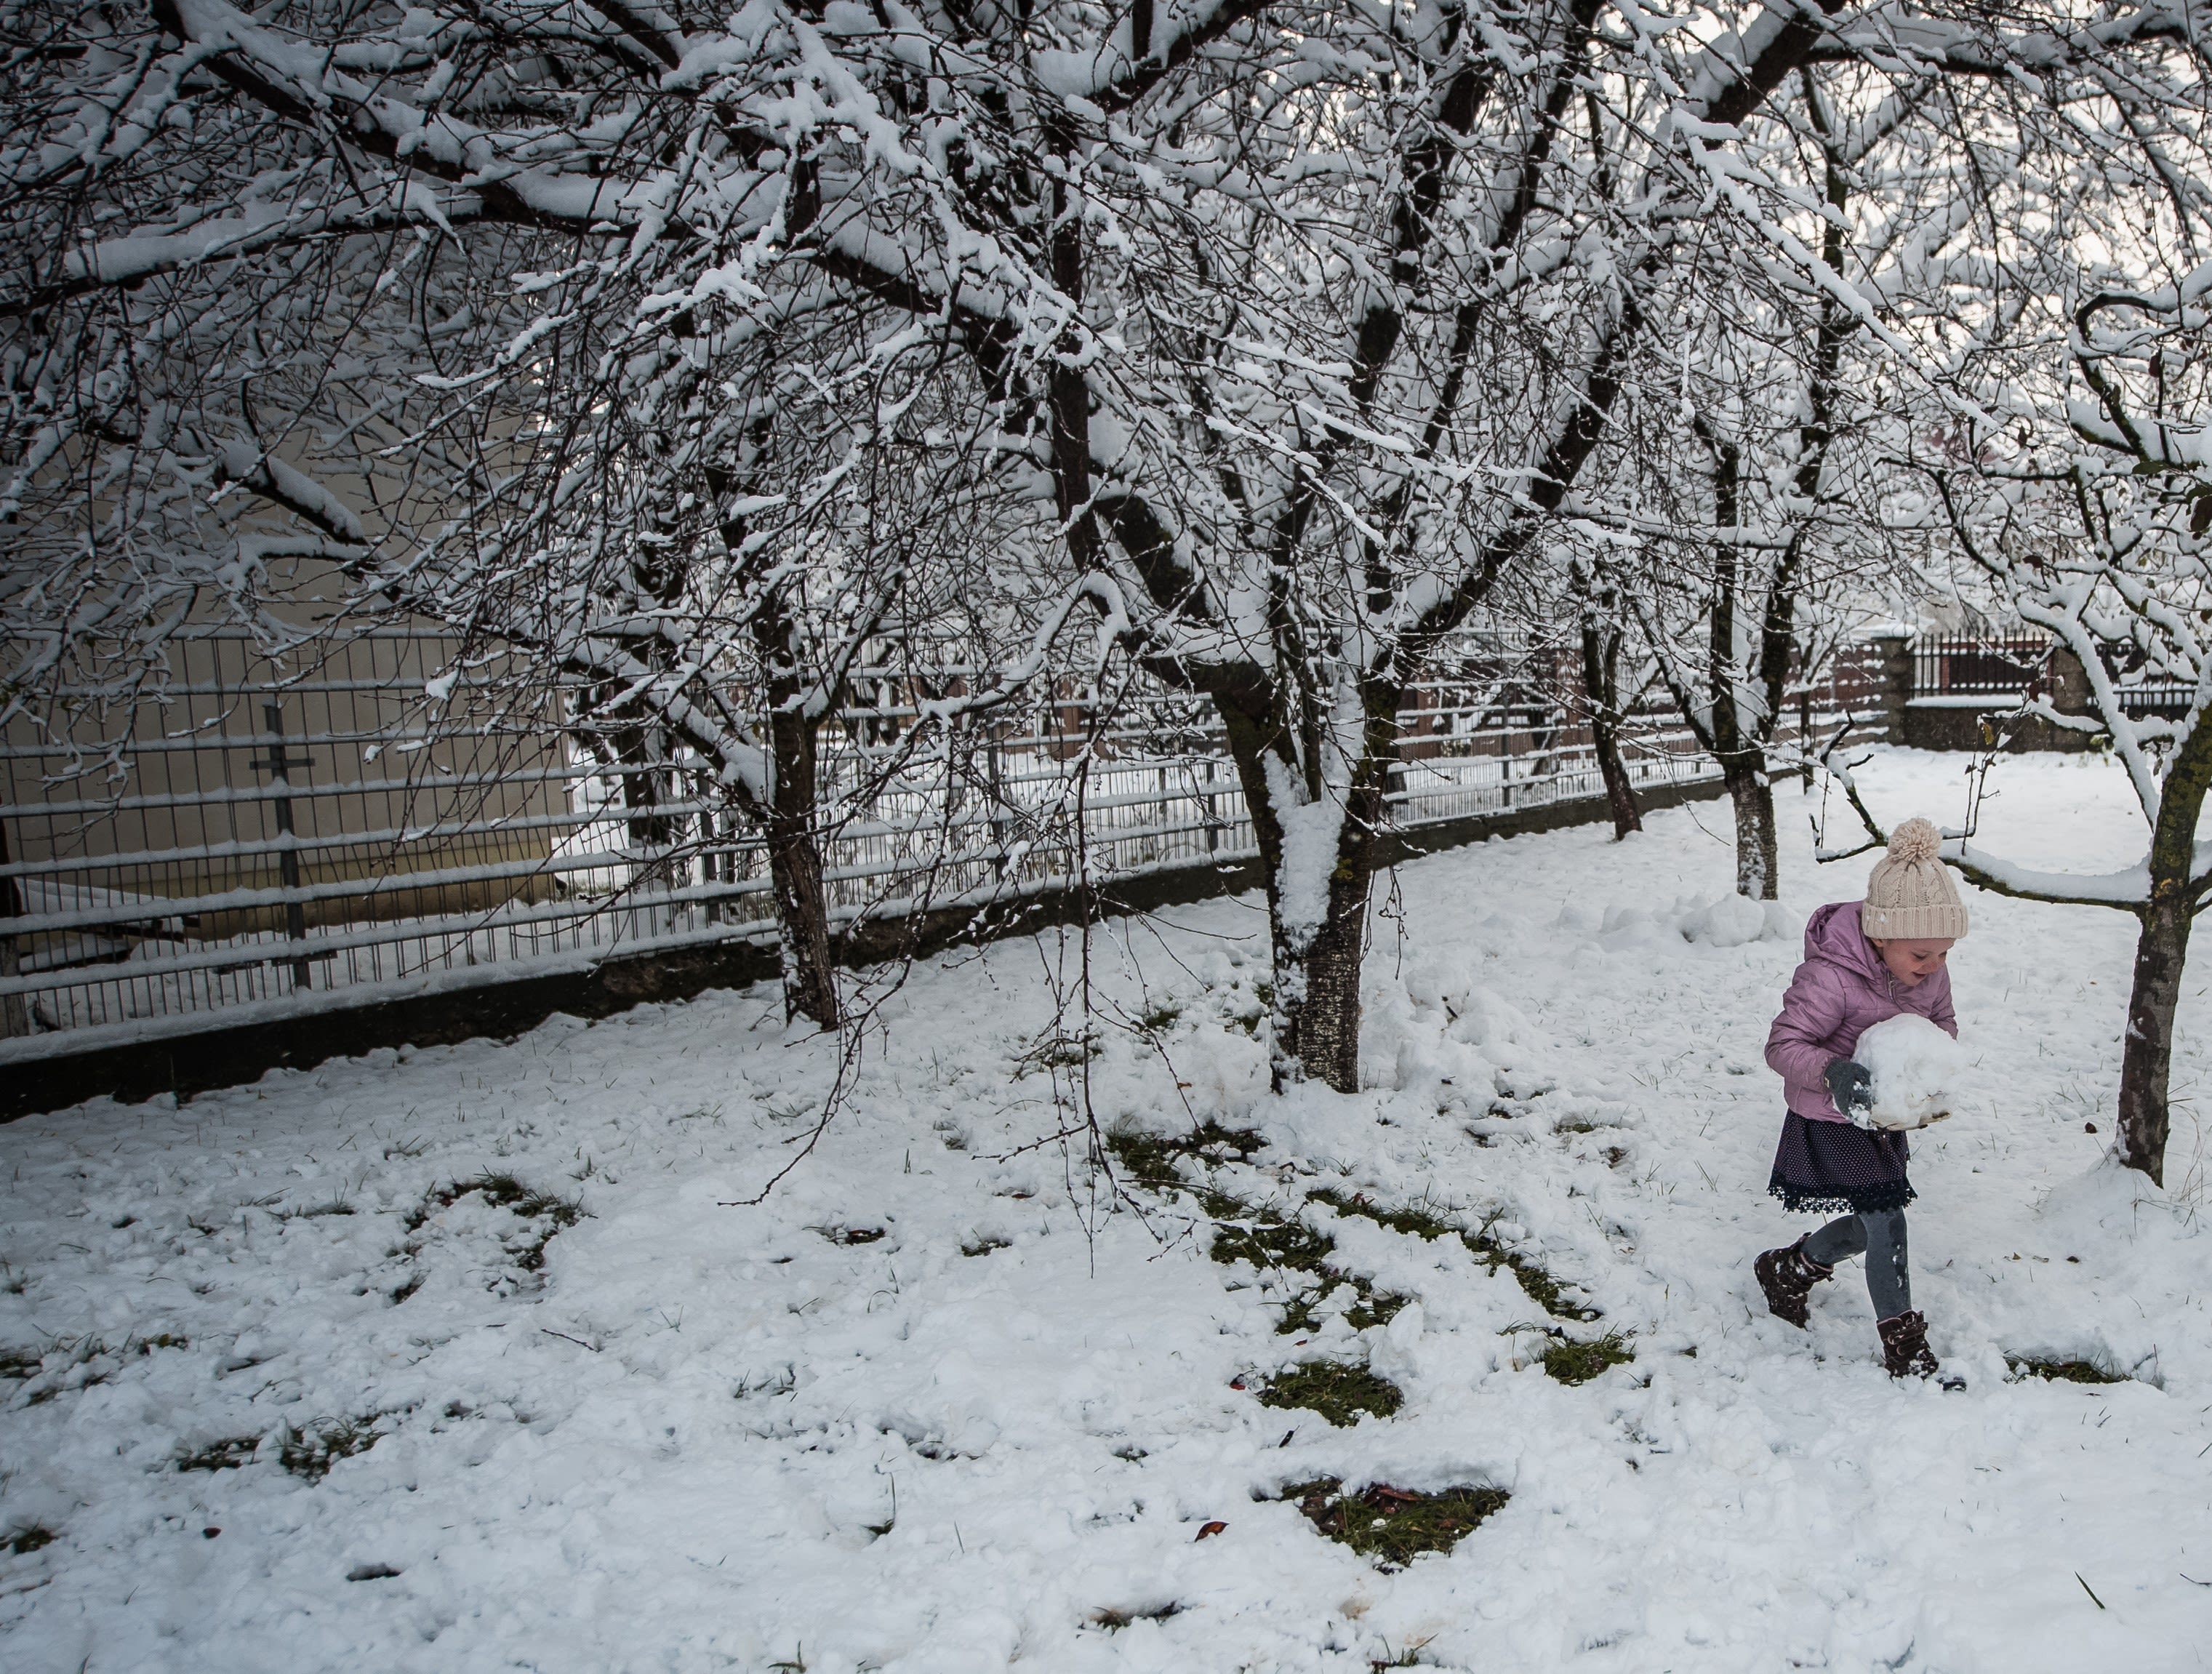 Alyona* 5 plays in the snow at her home in northern Romania.